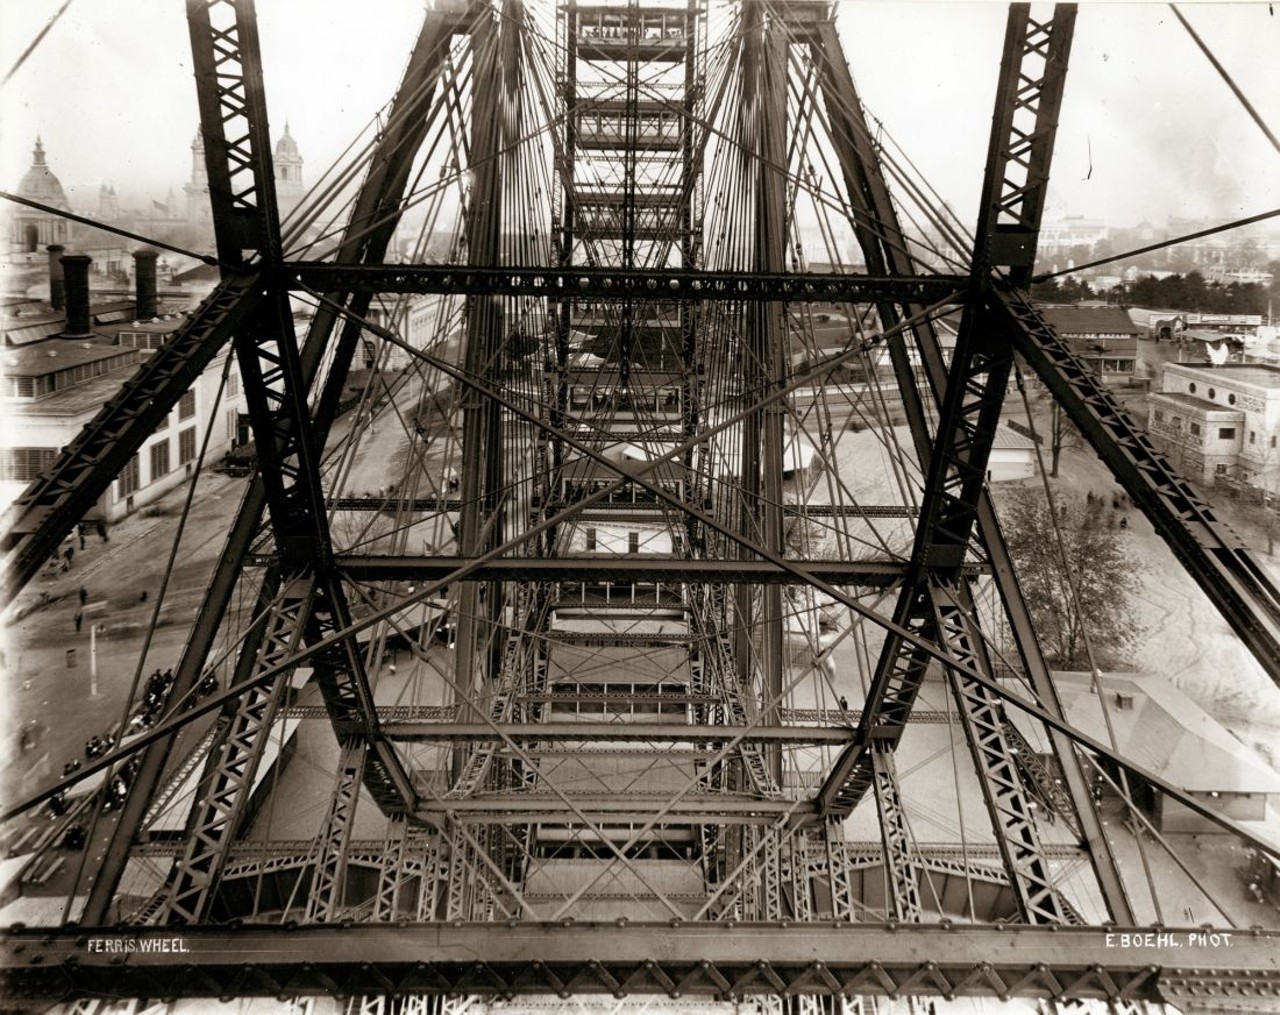 1904 WORLD'S FAIR VIEW FROM THROUGH FERRIS WHEEL.
Find out more about this photo at MoHistory.org.